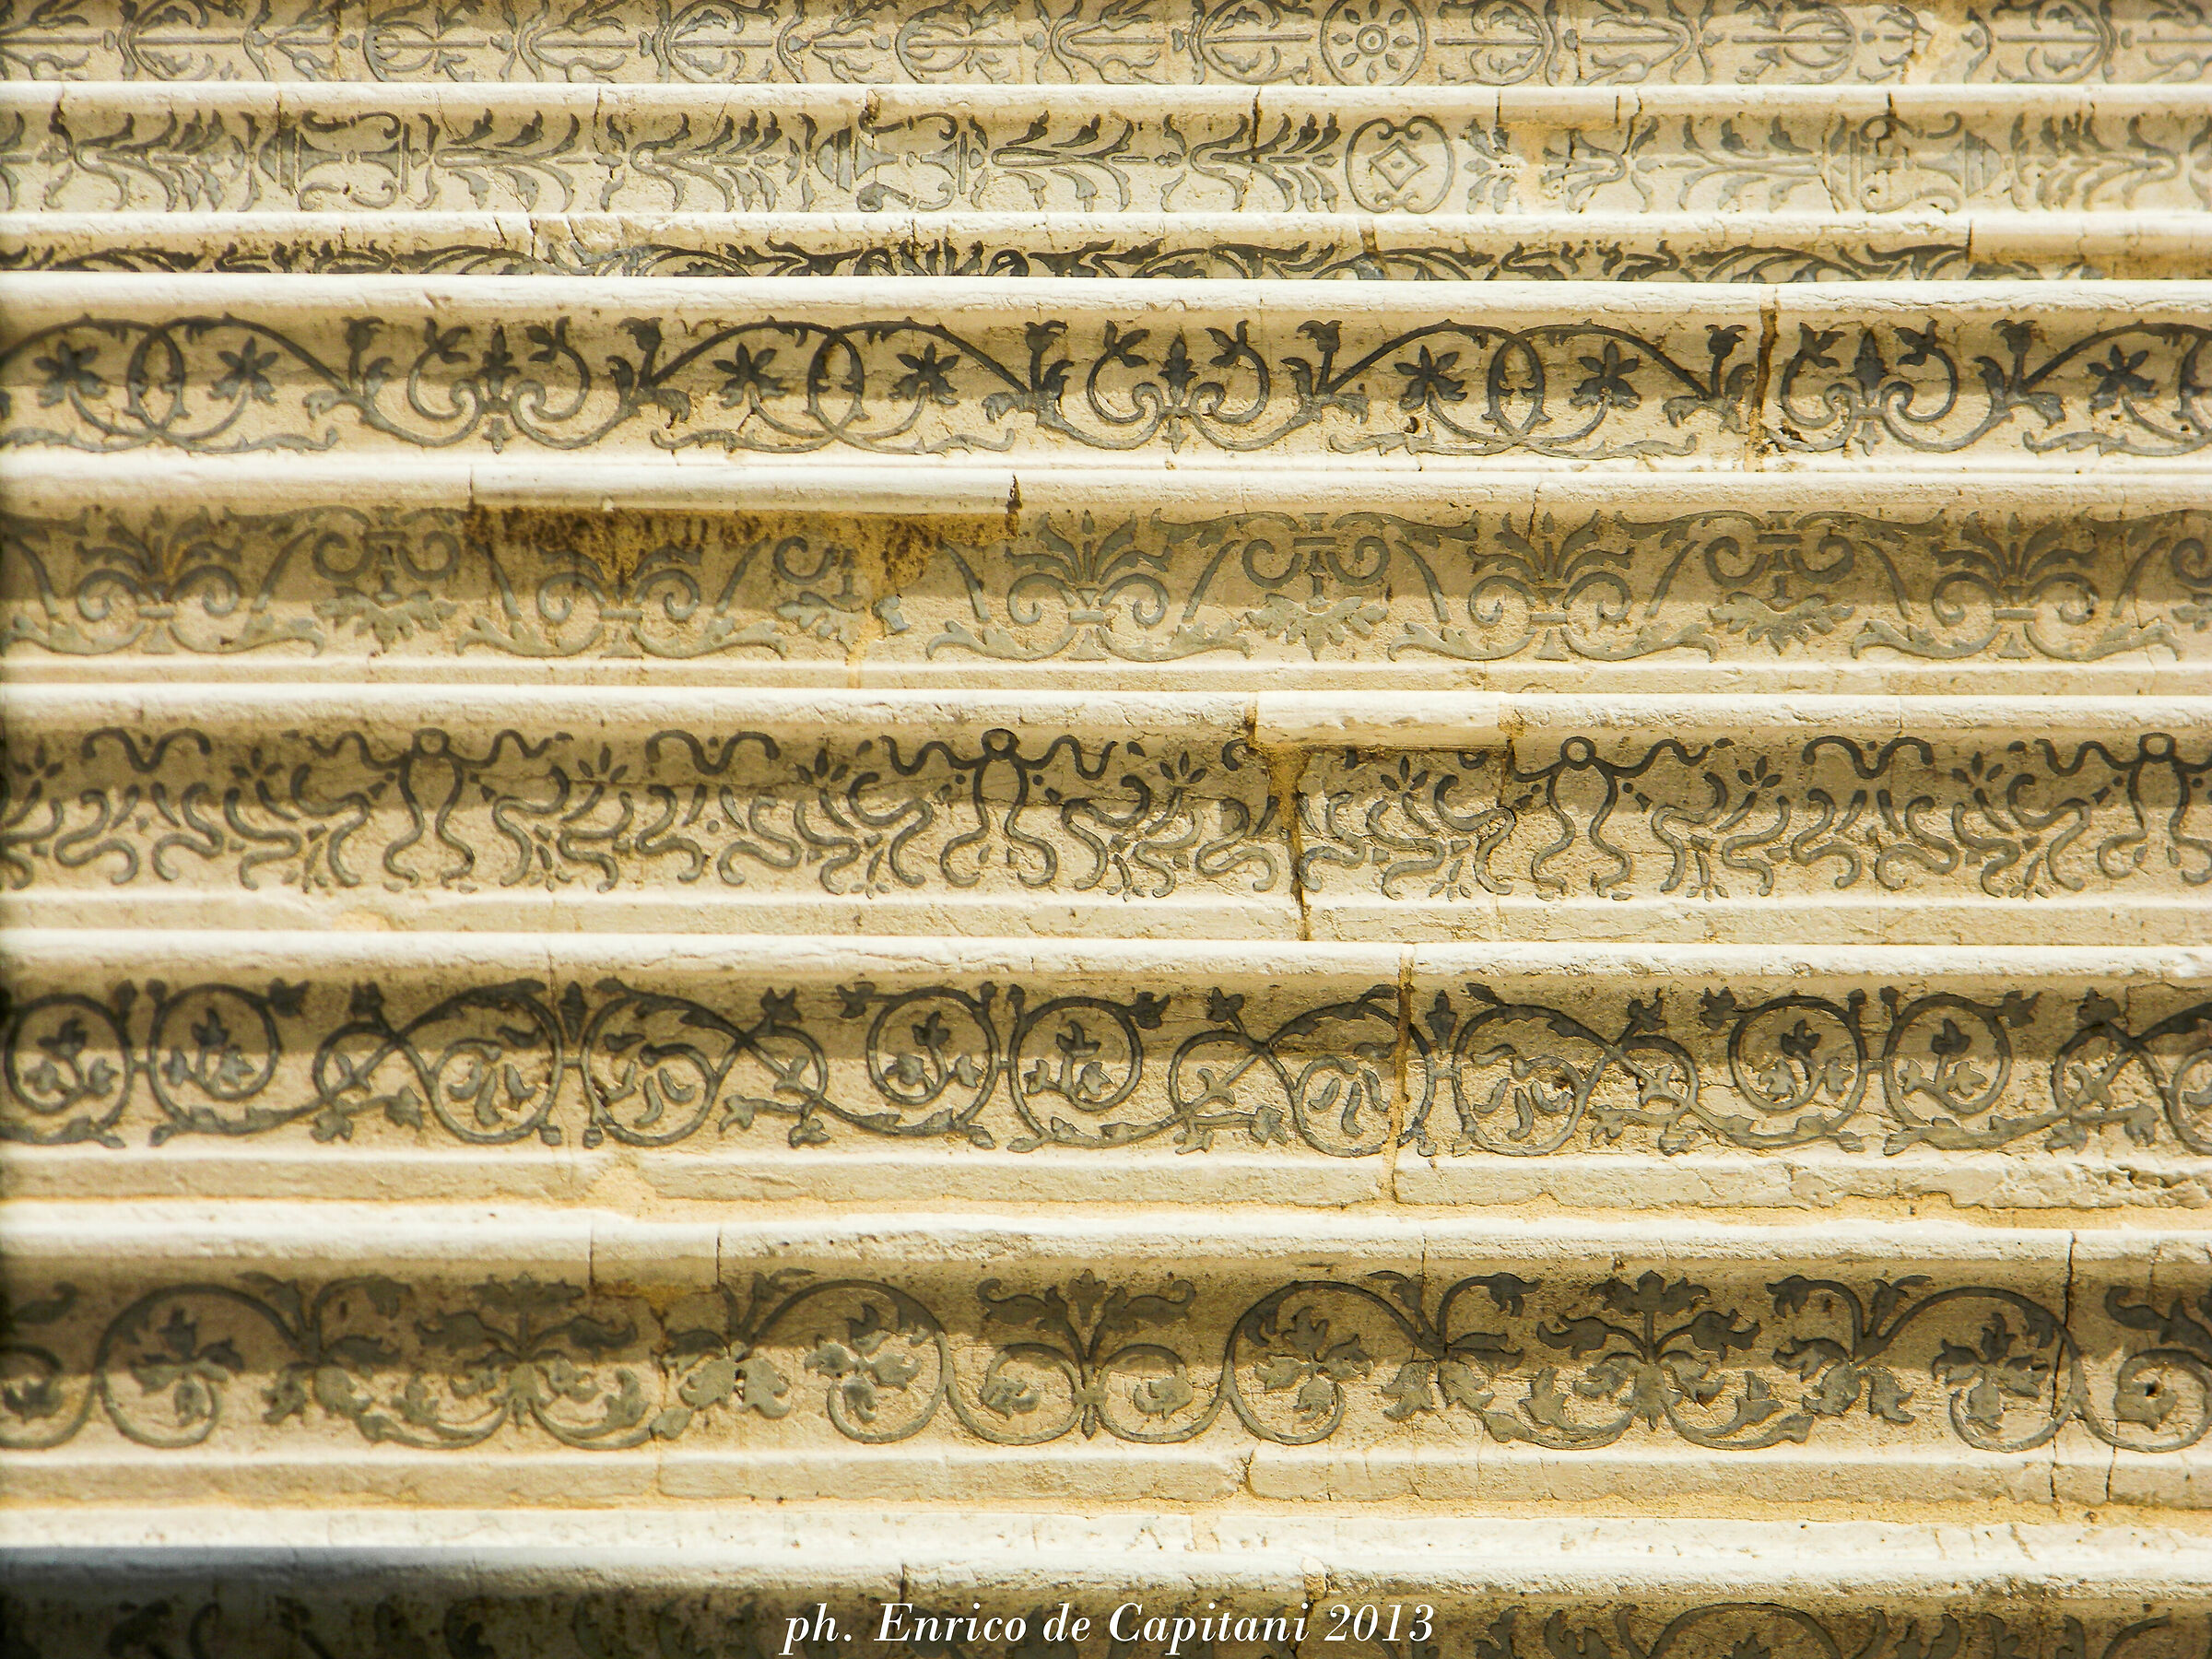 Venice 2013: the steps of Palazzo Ducale...